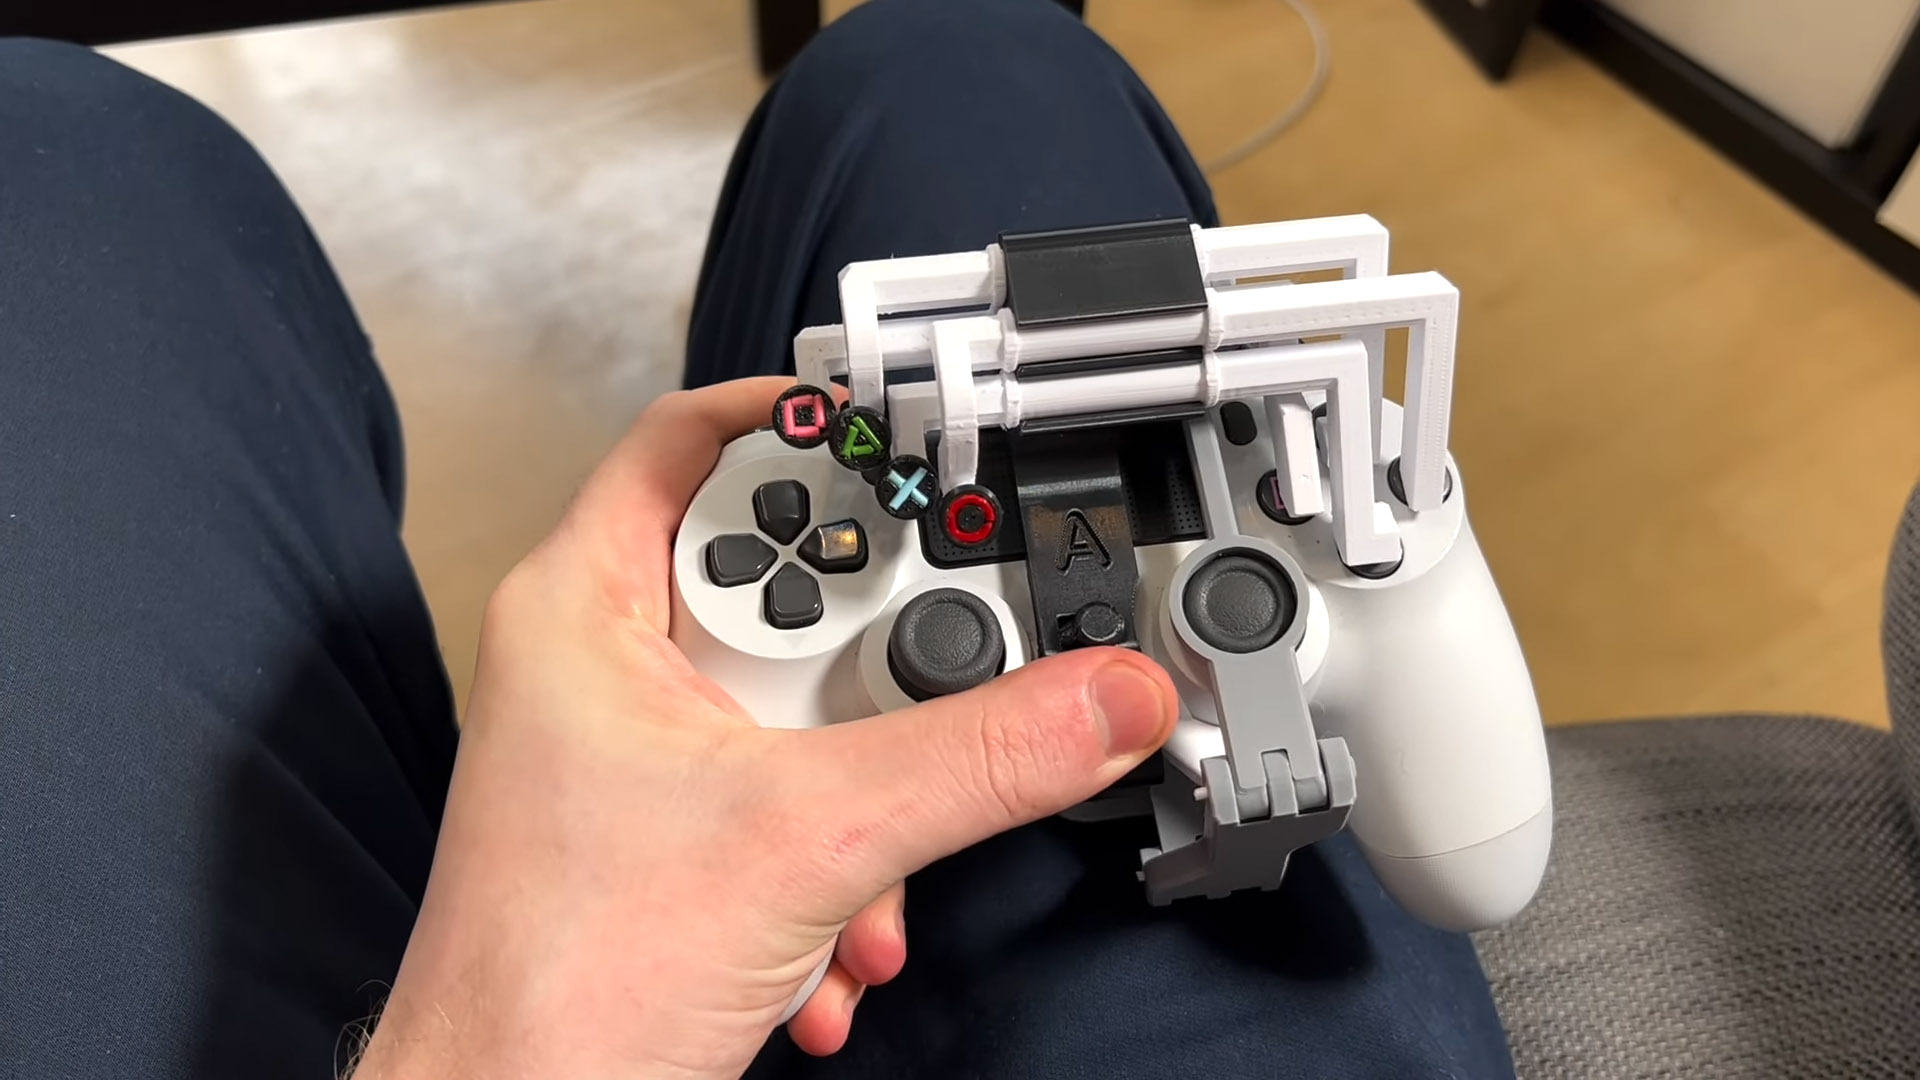 3D-printed PlayStation controller mod allows one-handed PS4 and PS5 gaming  -  News